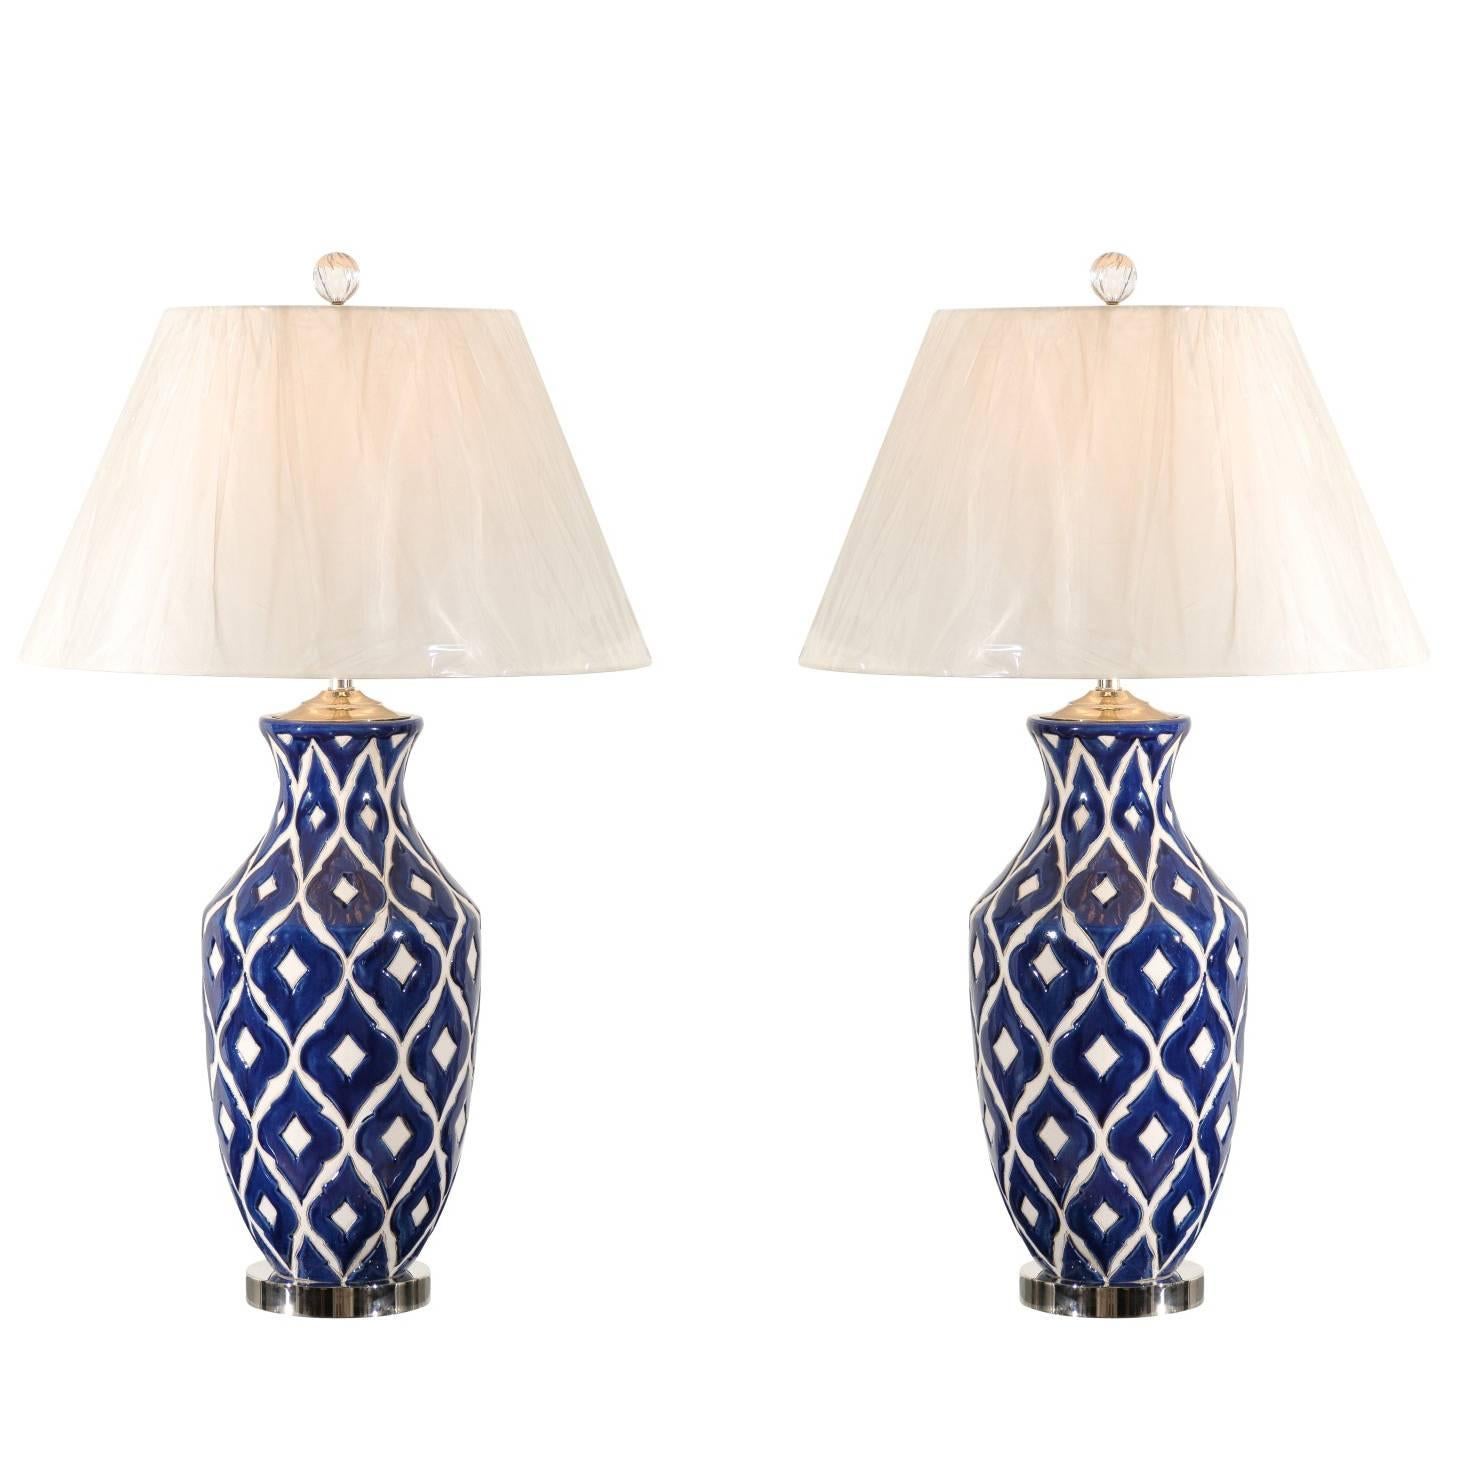 Striking Pair of Large-Scale Ceramic Lamps with Accents of Nickel and Lucite